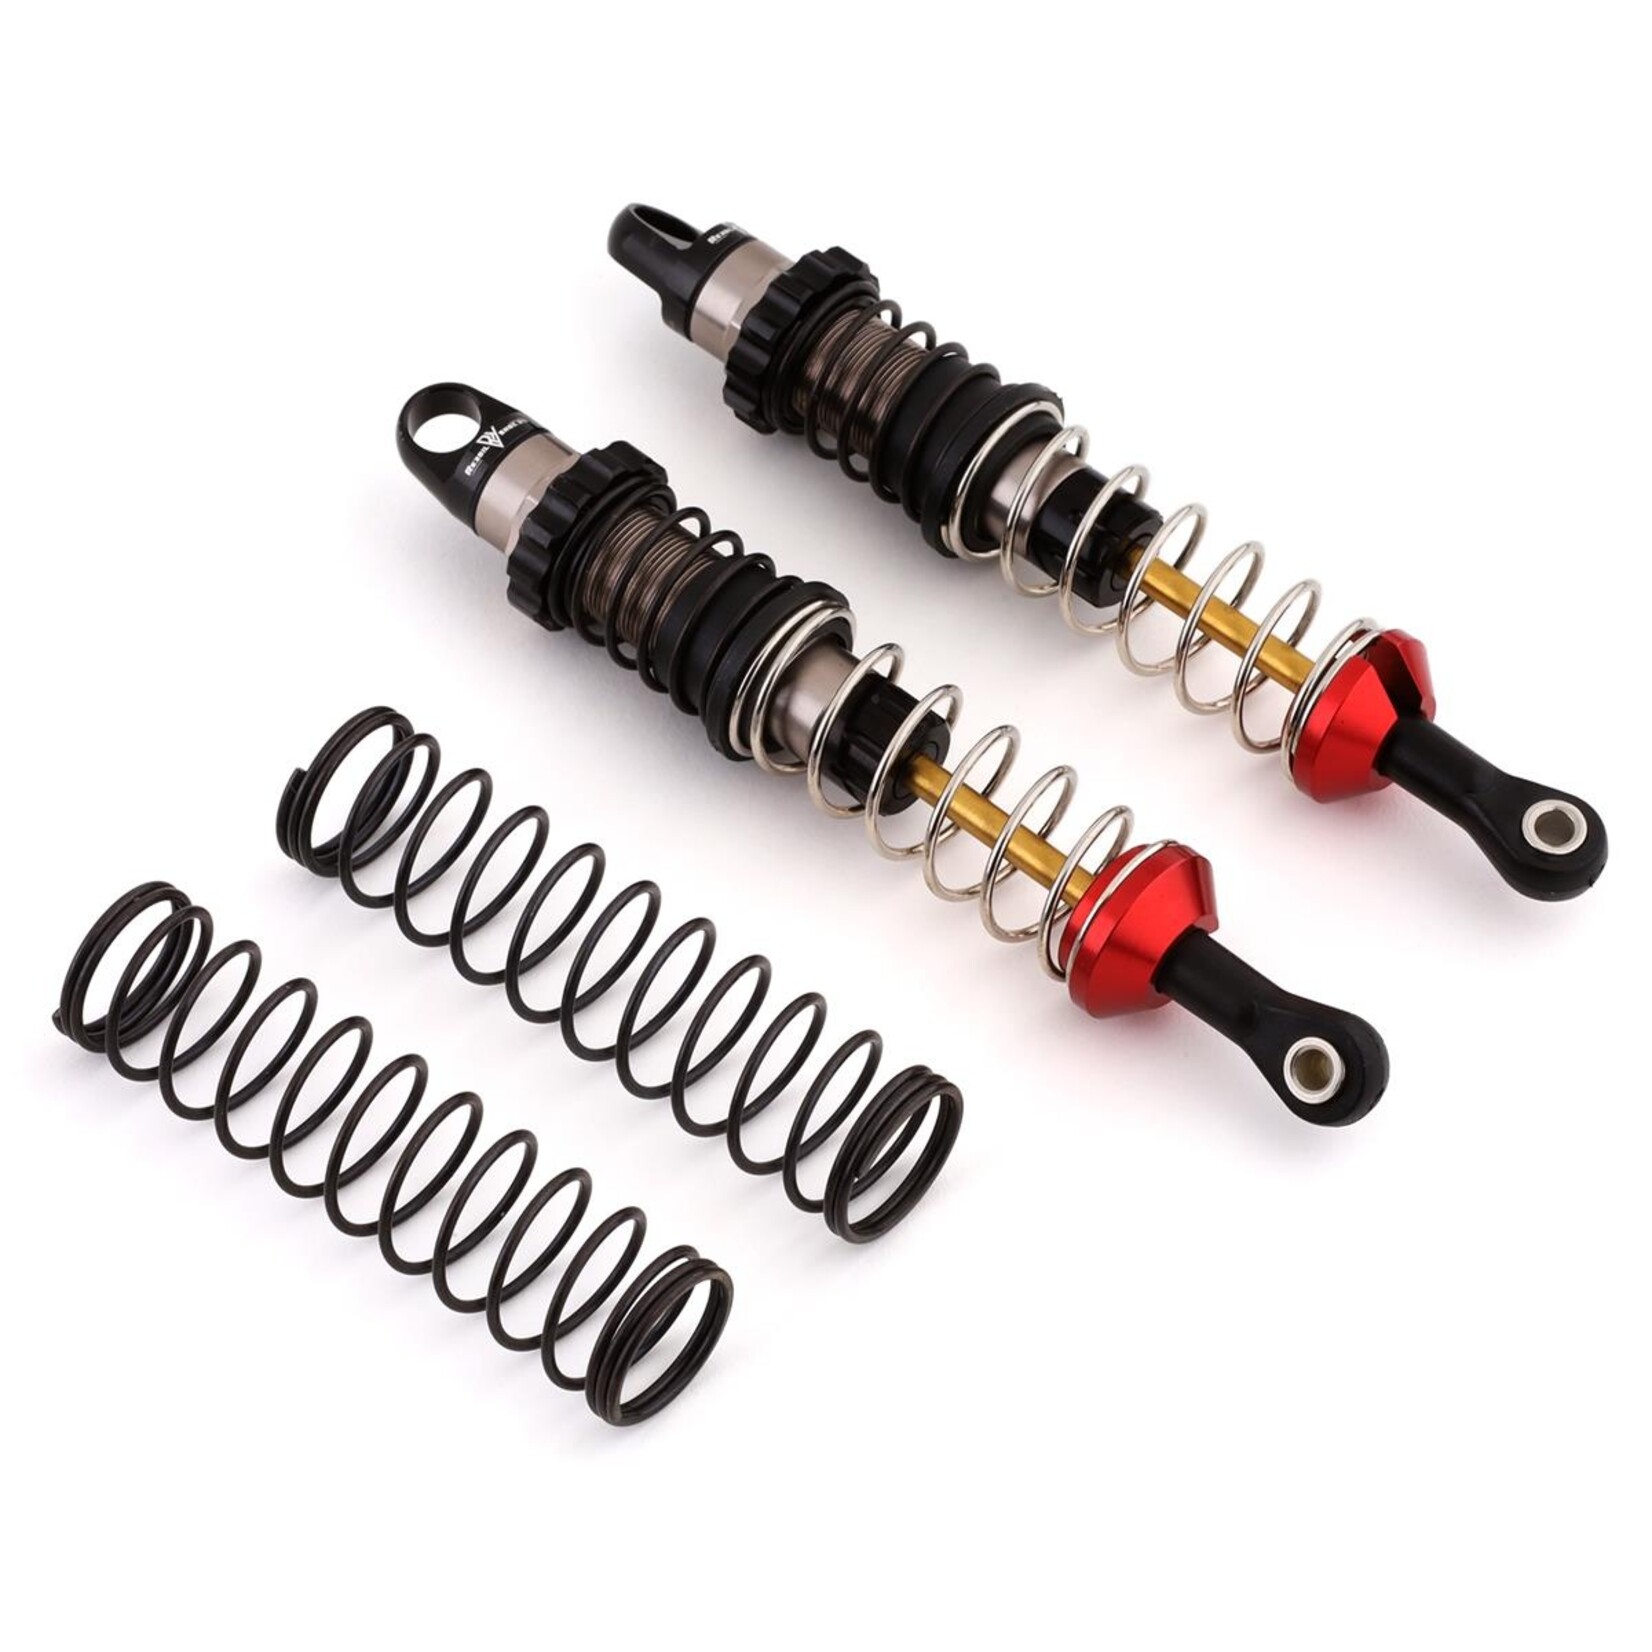 FriXion RC FriXion RC REKOIL Scale Crawler Shocks w/Xtender Rod Ends (2) (85-90mm) #FRX901